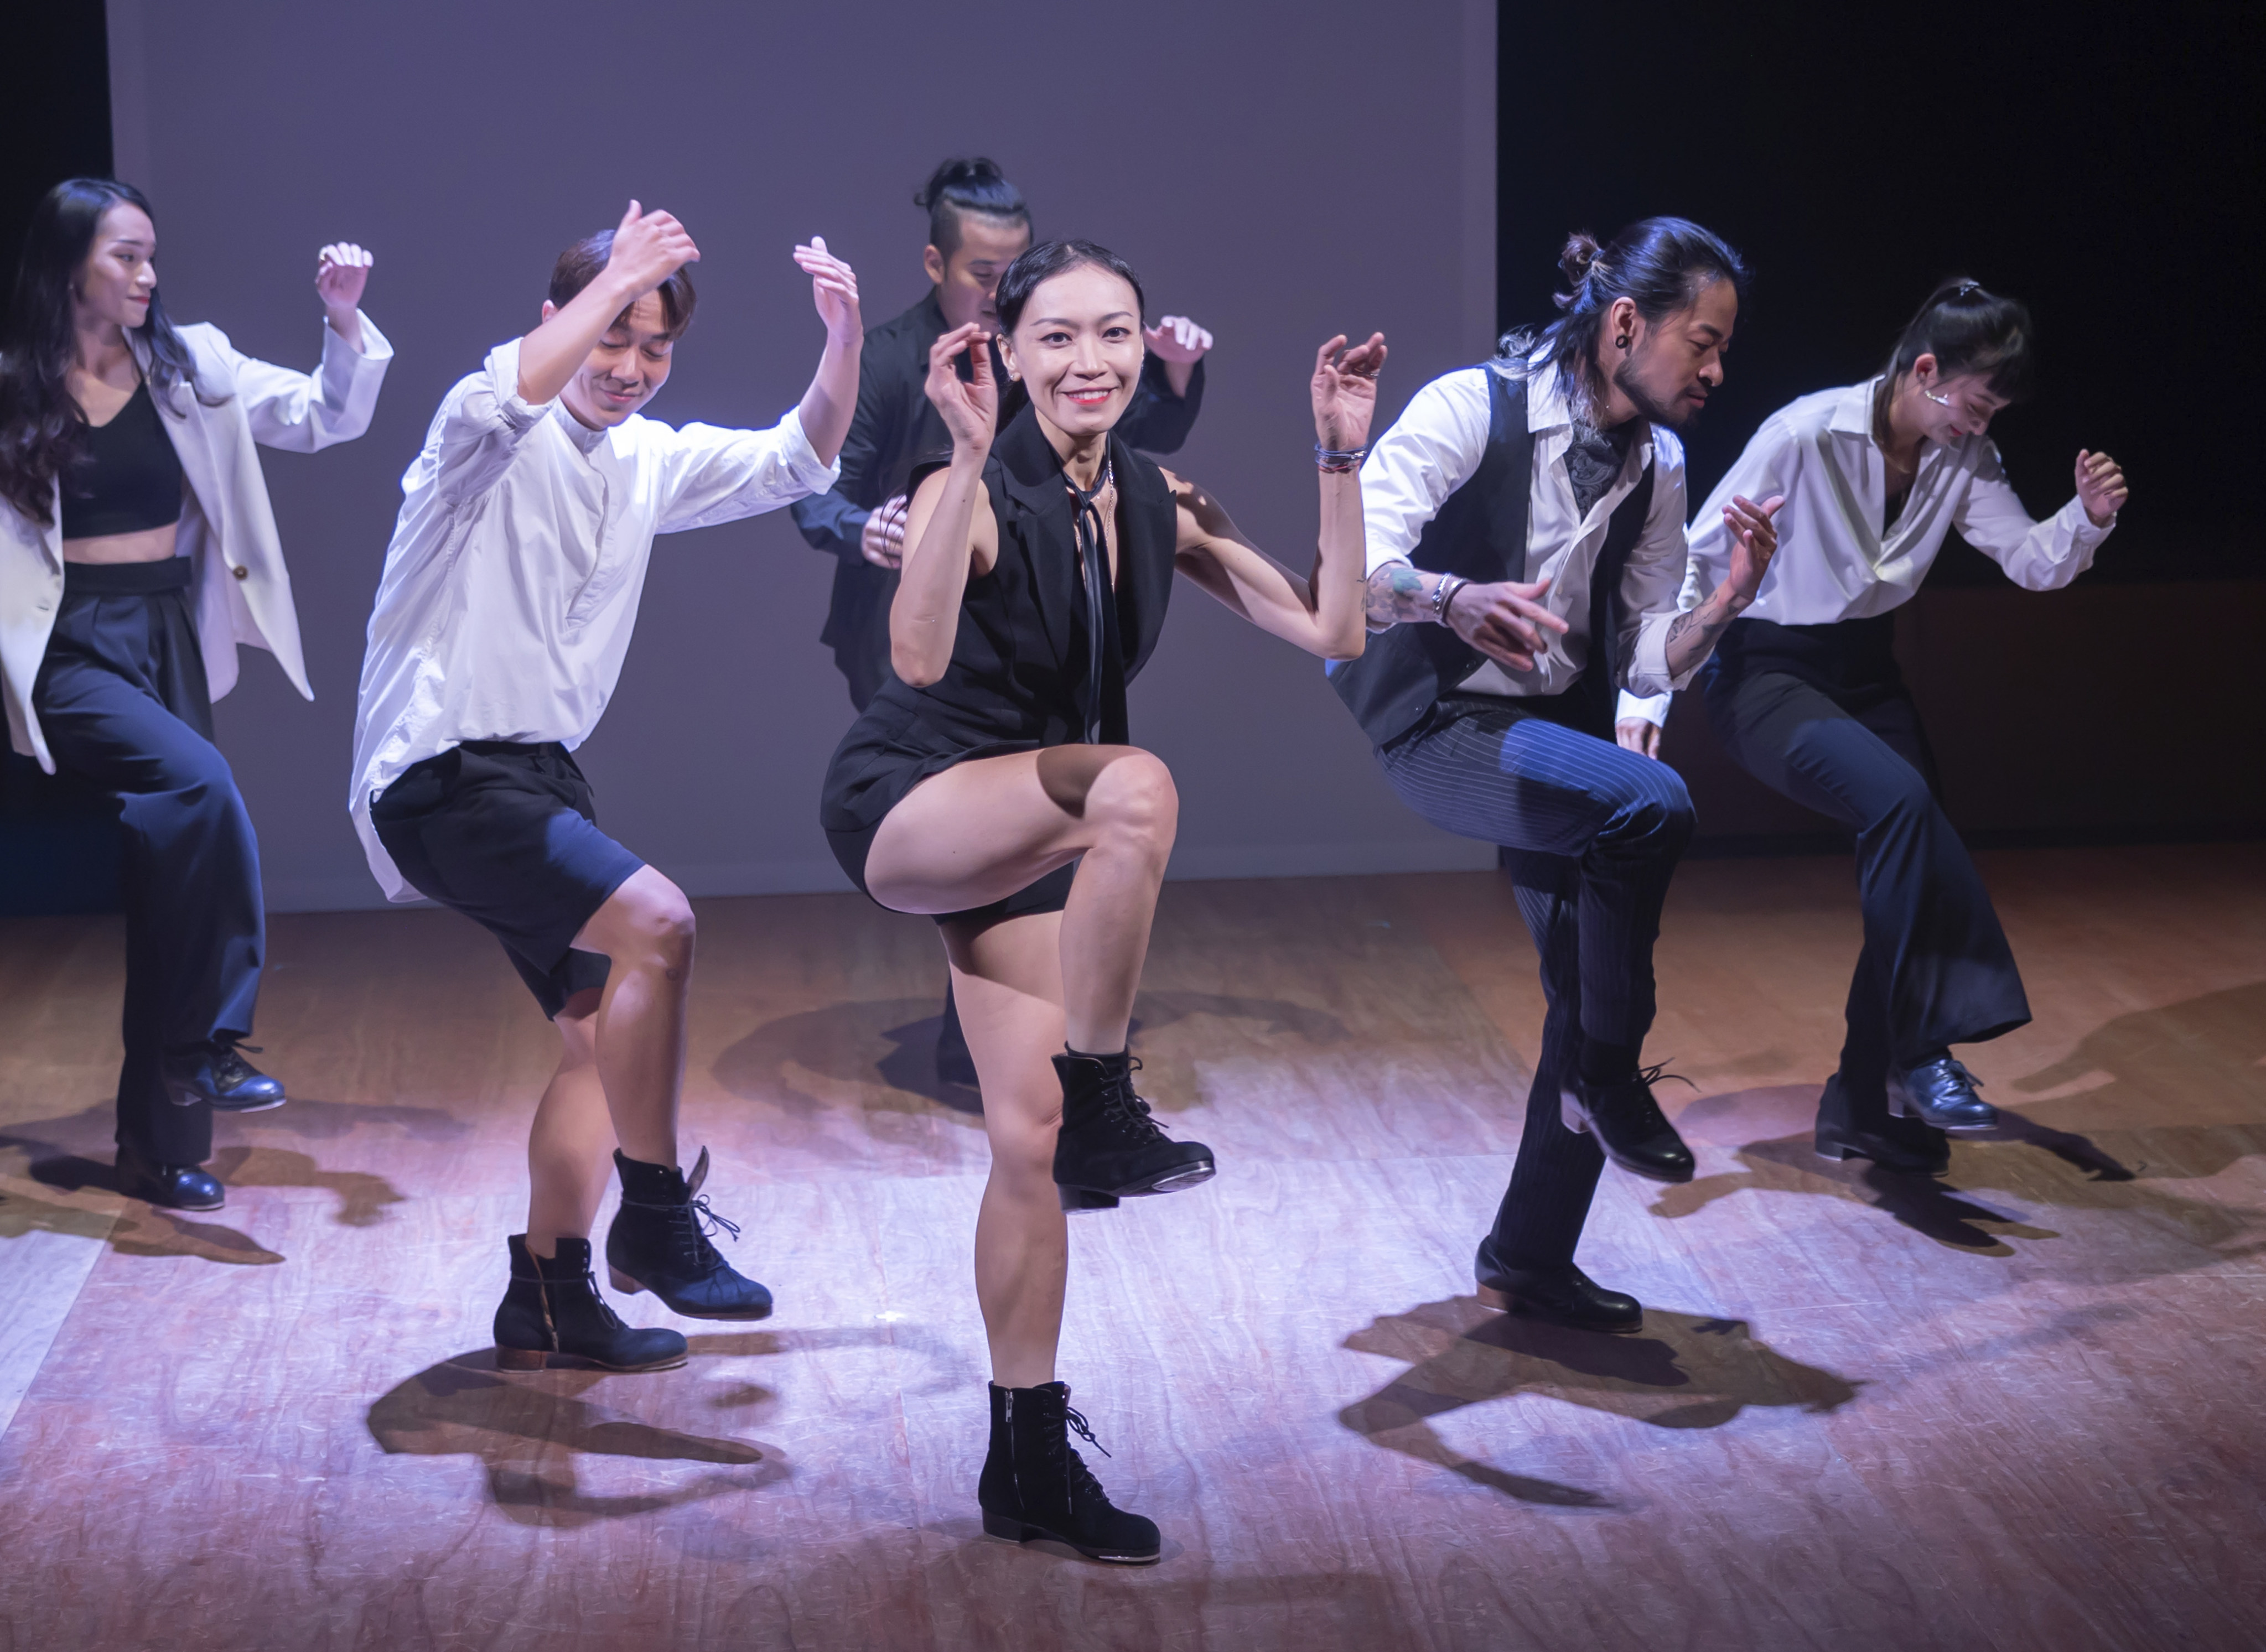 Taiwanese dance company Dance Works performs “I’ll Close My Eyes”, by Japanese choreographer Yuji Uragami, at the 10th Hong Kong Tap Festival, a celebration of tap dancing. Photo: Dicky Wong